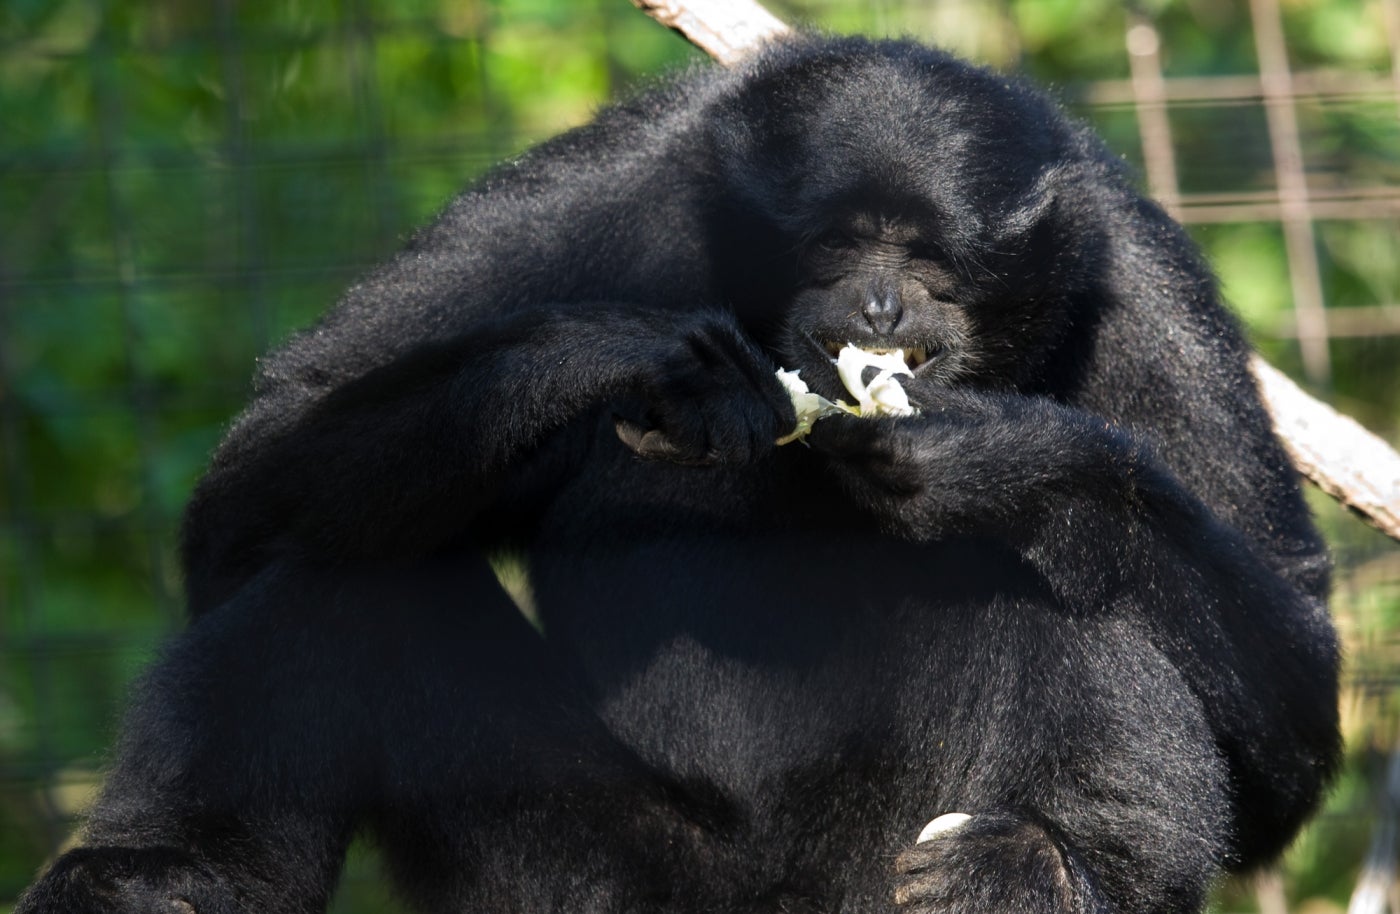 Siamang (gibbon) Bradley sits and eats a piece of fruit. He has thick black fur and long arms, and sits with his knees bent.